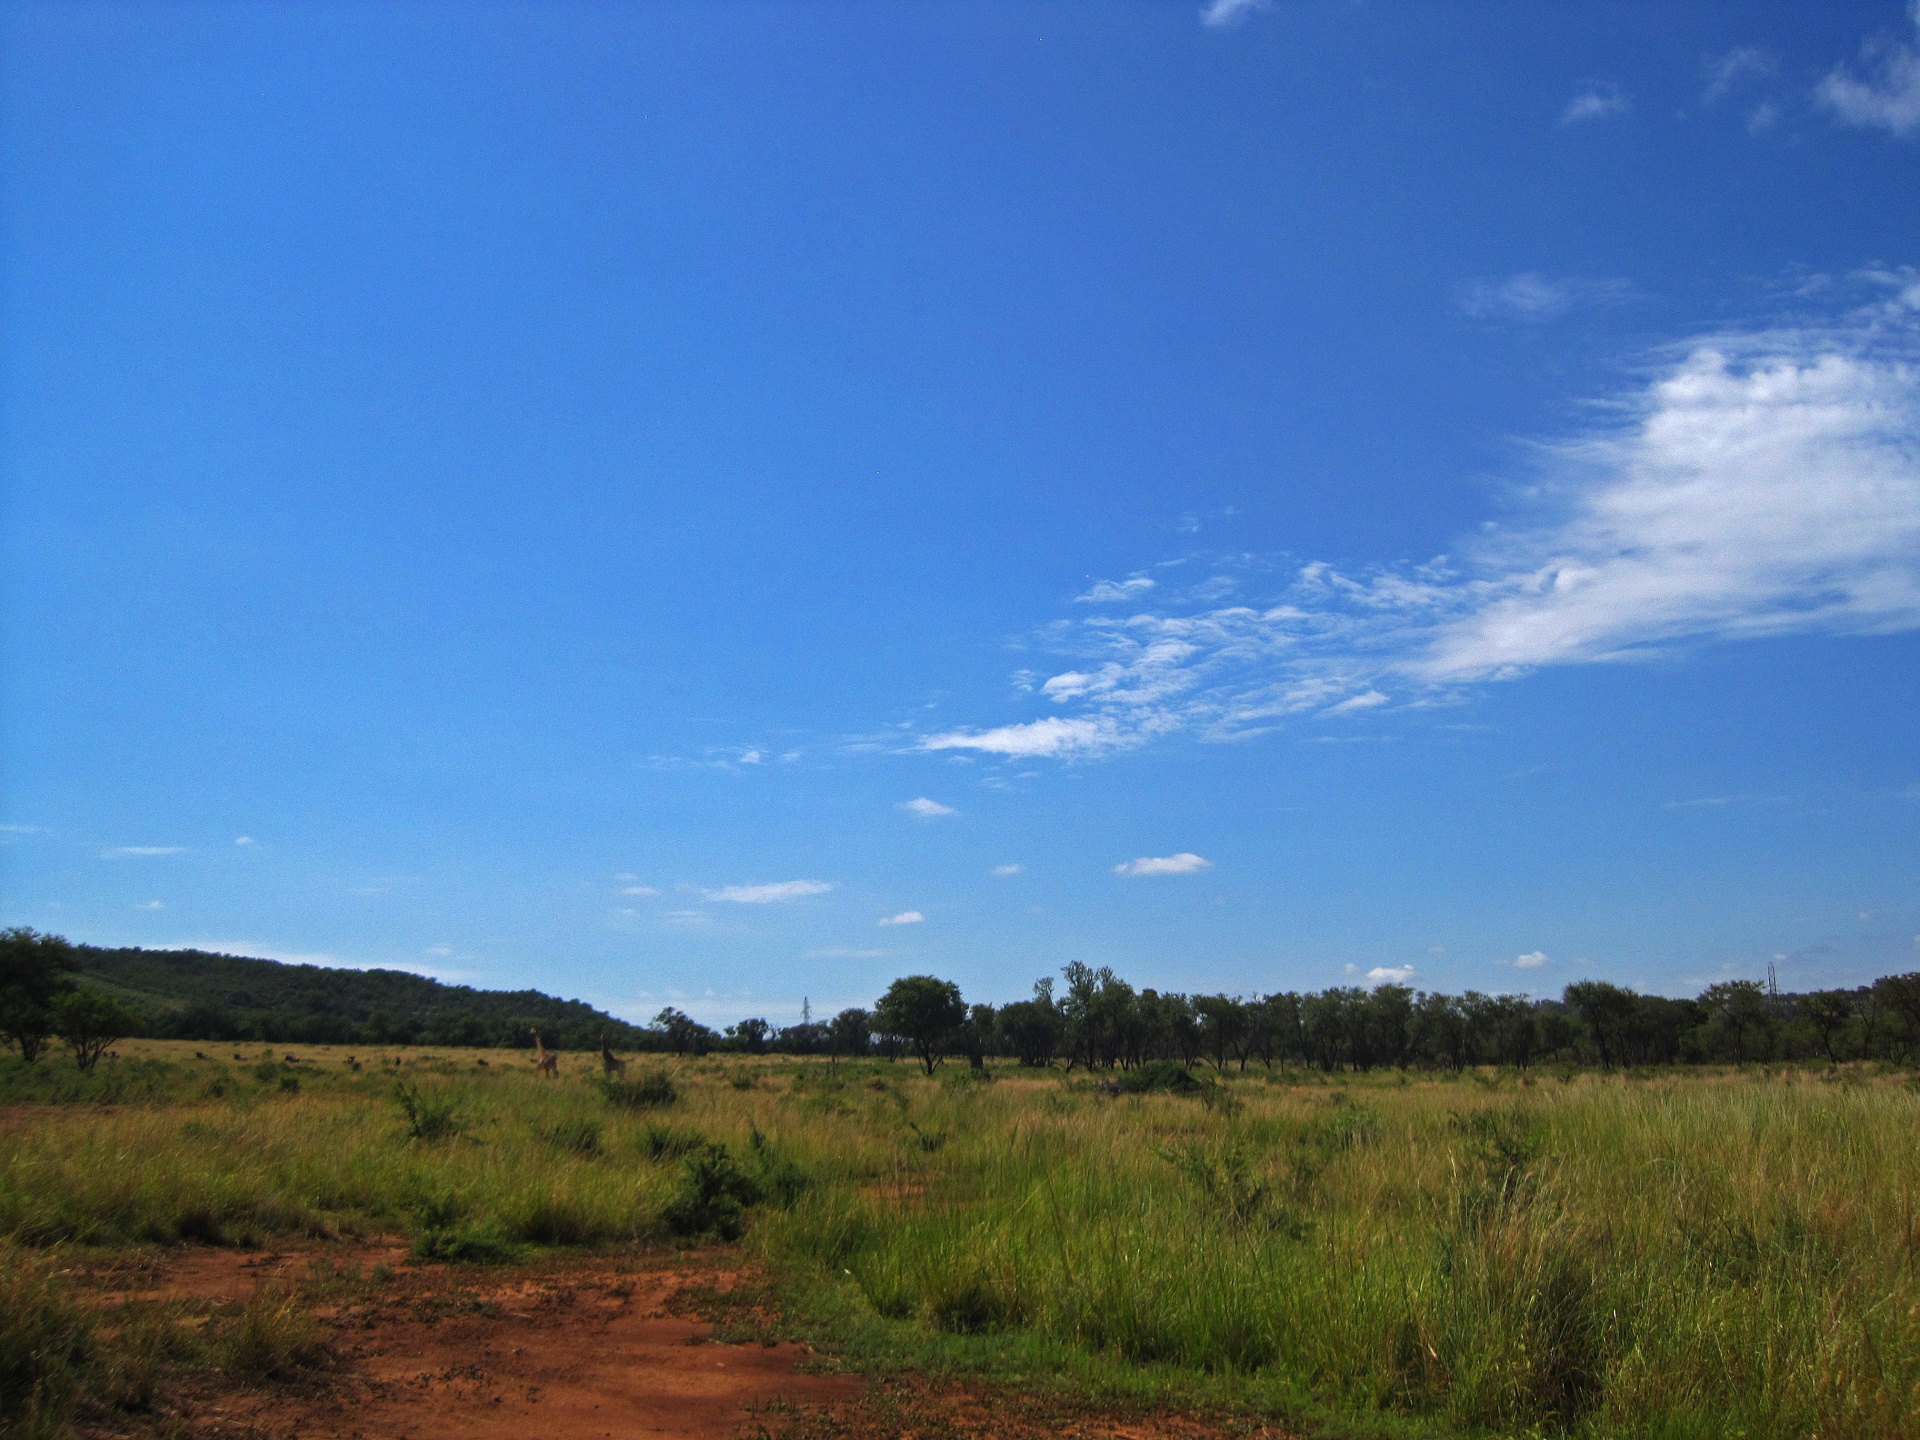 grassland with open woodland in a south african landscape